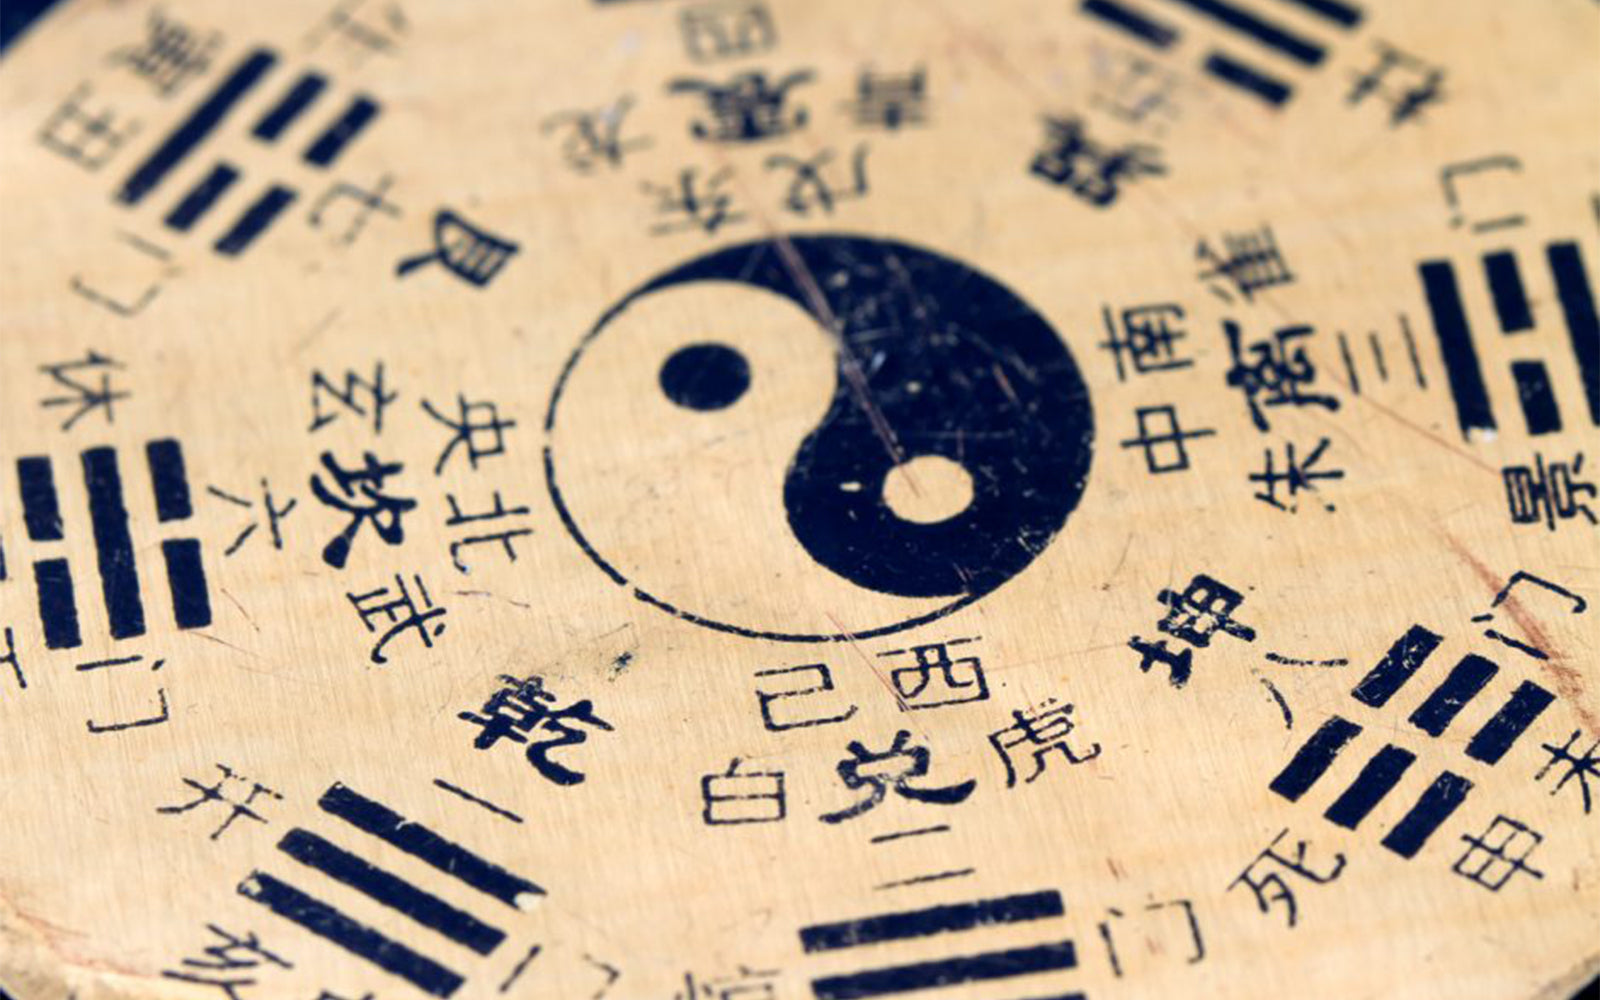 Yin and Yang: What Does the Symbol Mean?